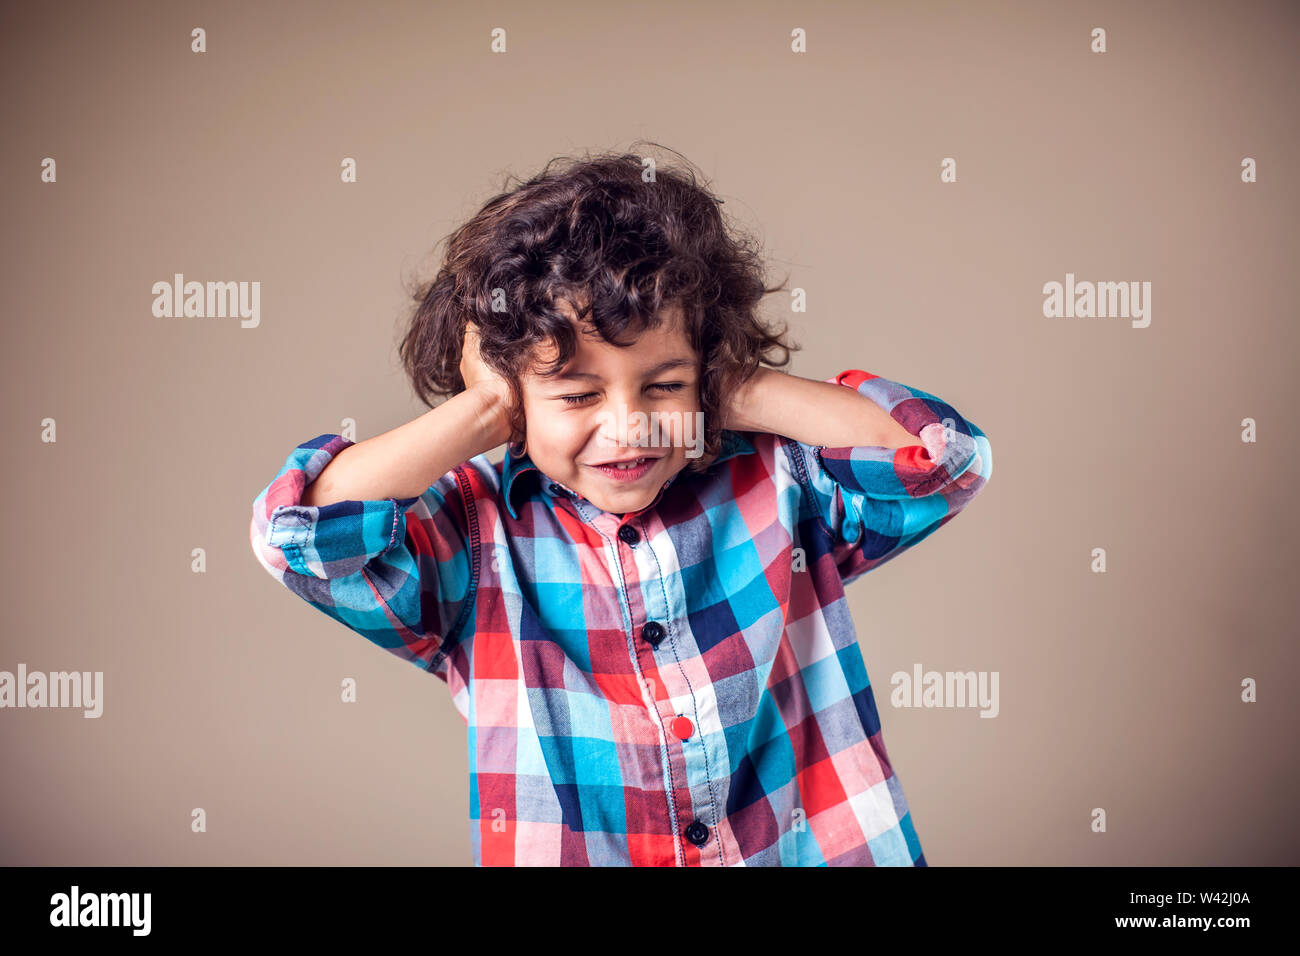 Young boy with covering his ears with hands.Children and emotions concept Stock Photo